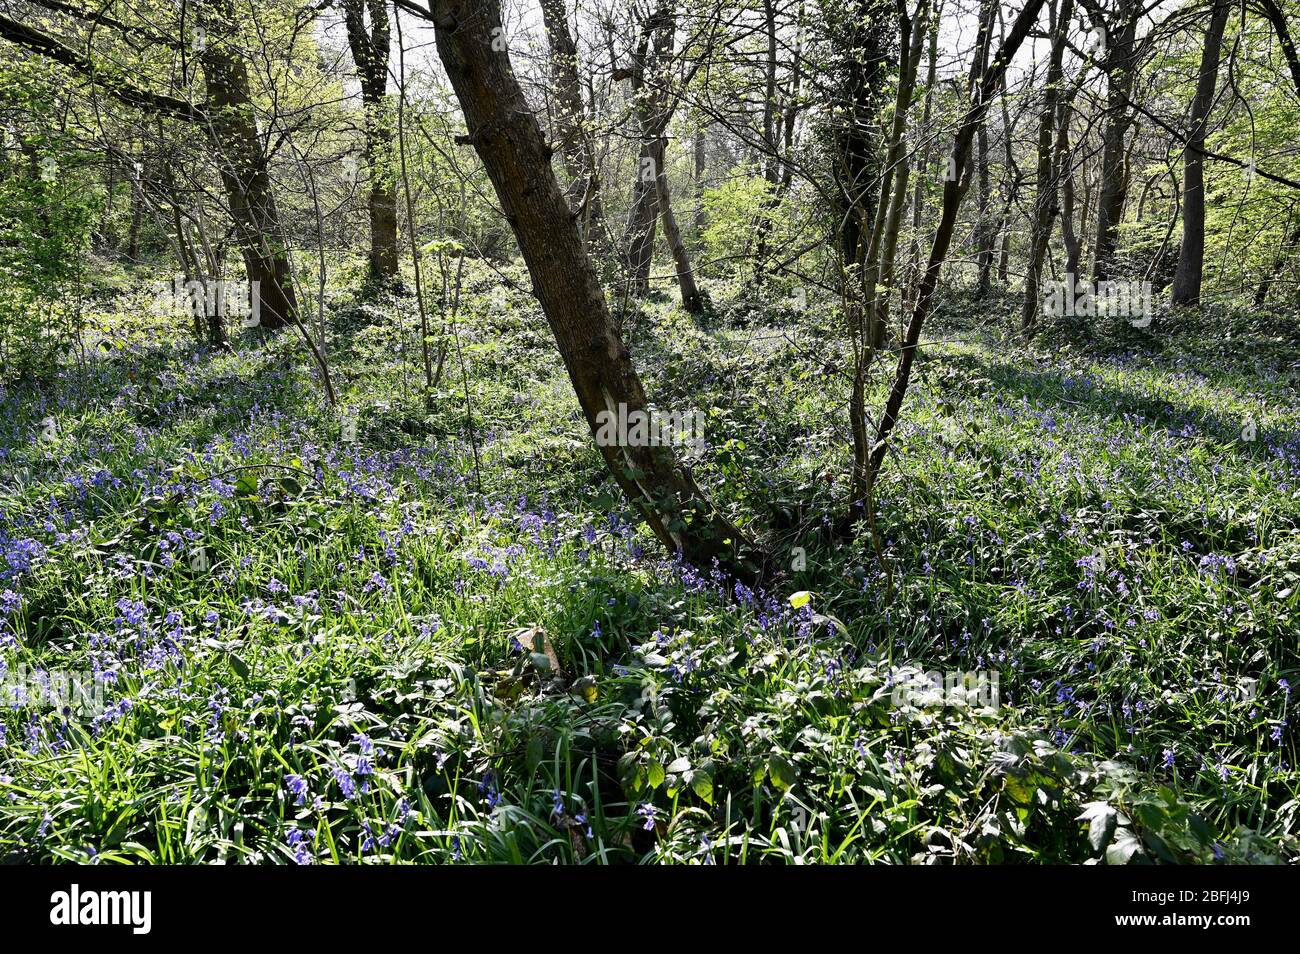 Bluebell Woods, Roots Cray Meadows, Sidcup, Kent. ROYAUME-UNI Banque D'Images